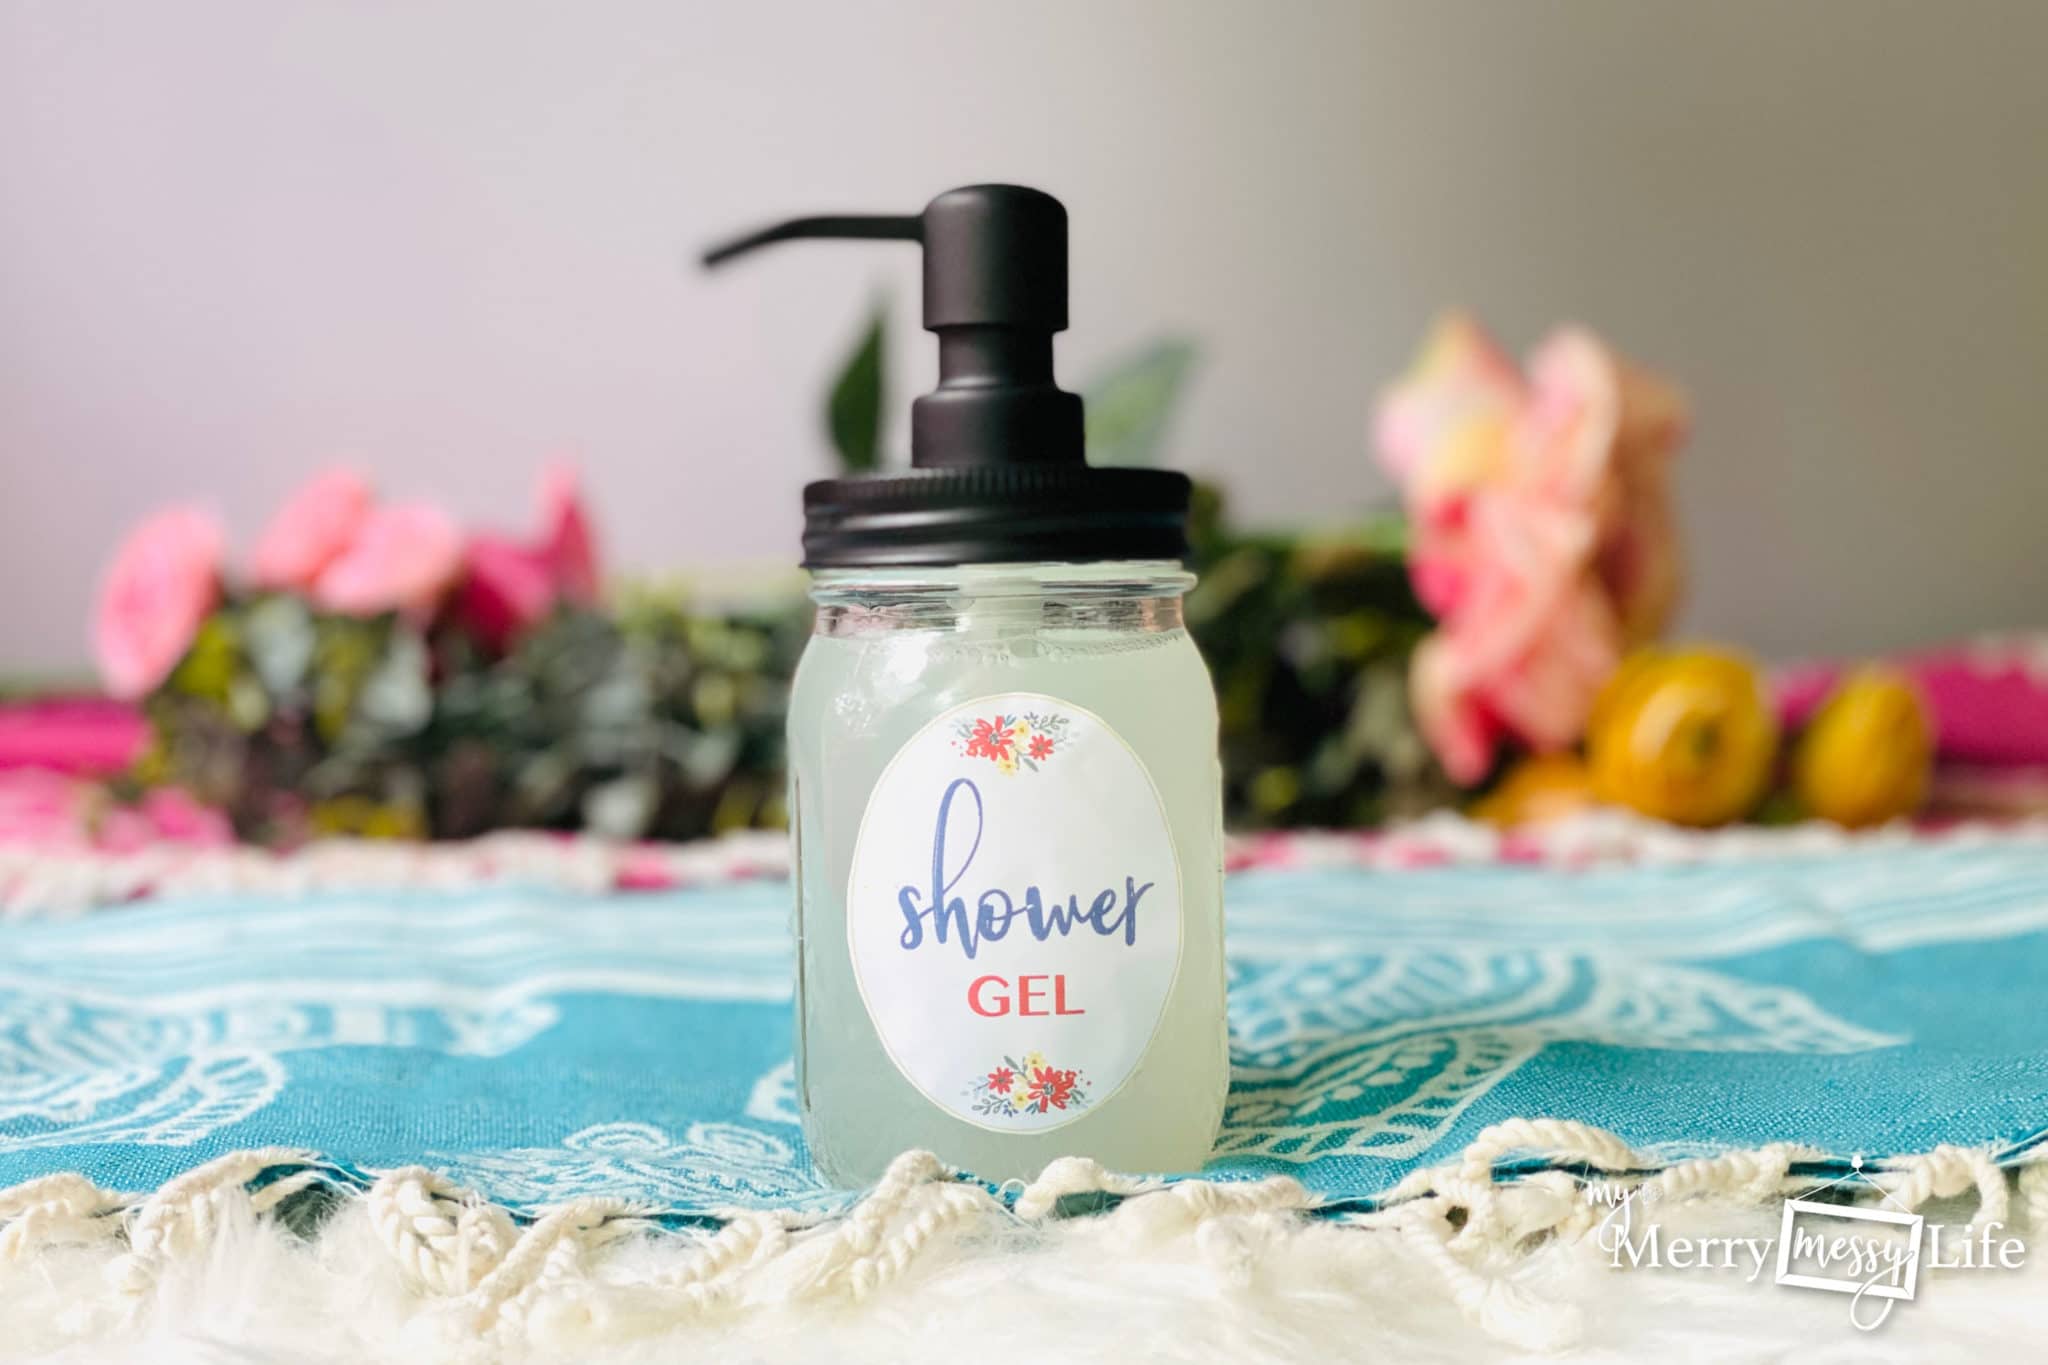 DIY Natural Shower Gel Recipe using Castile Soap, essential oils and more - and it is actually a gel!